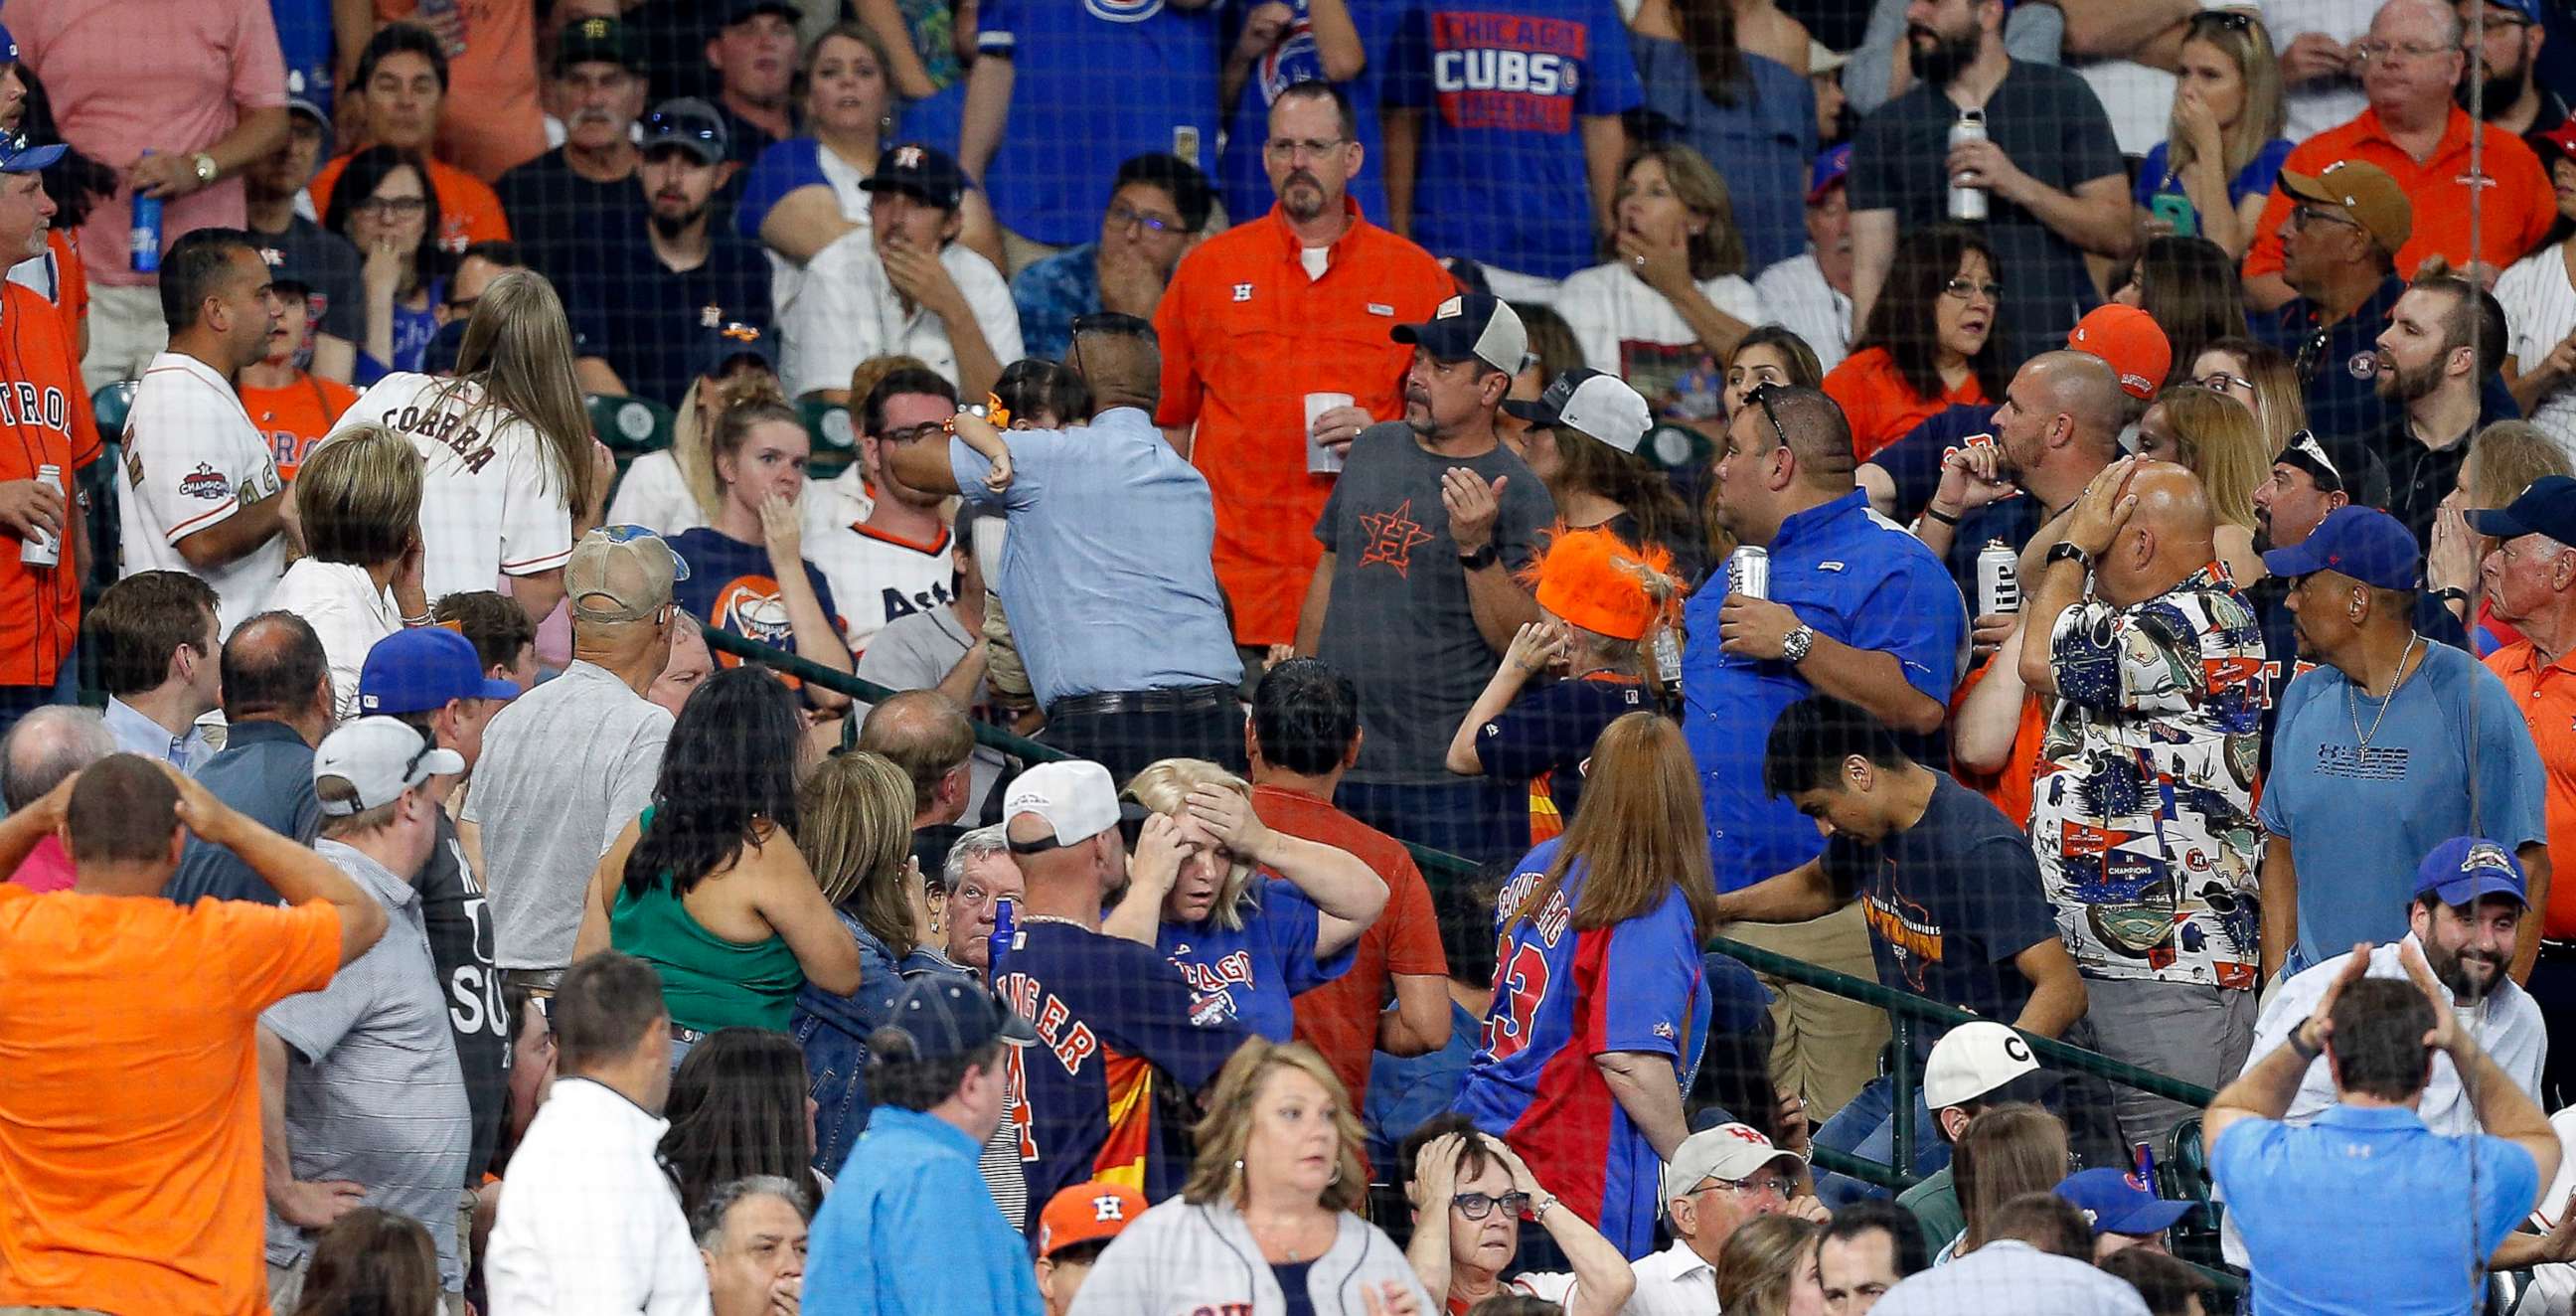 Astros reach settlement with parents of toddler hit by foul ball in 2019,  family attorney says - ABC News